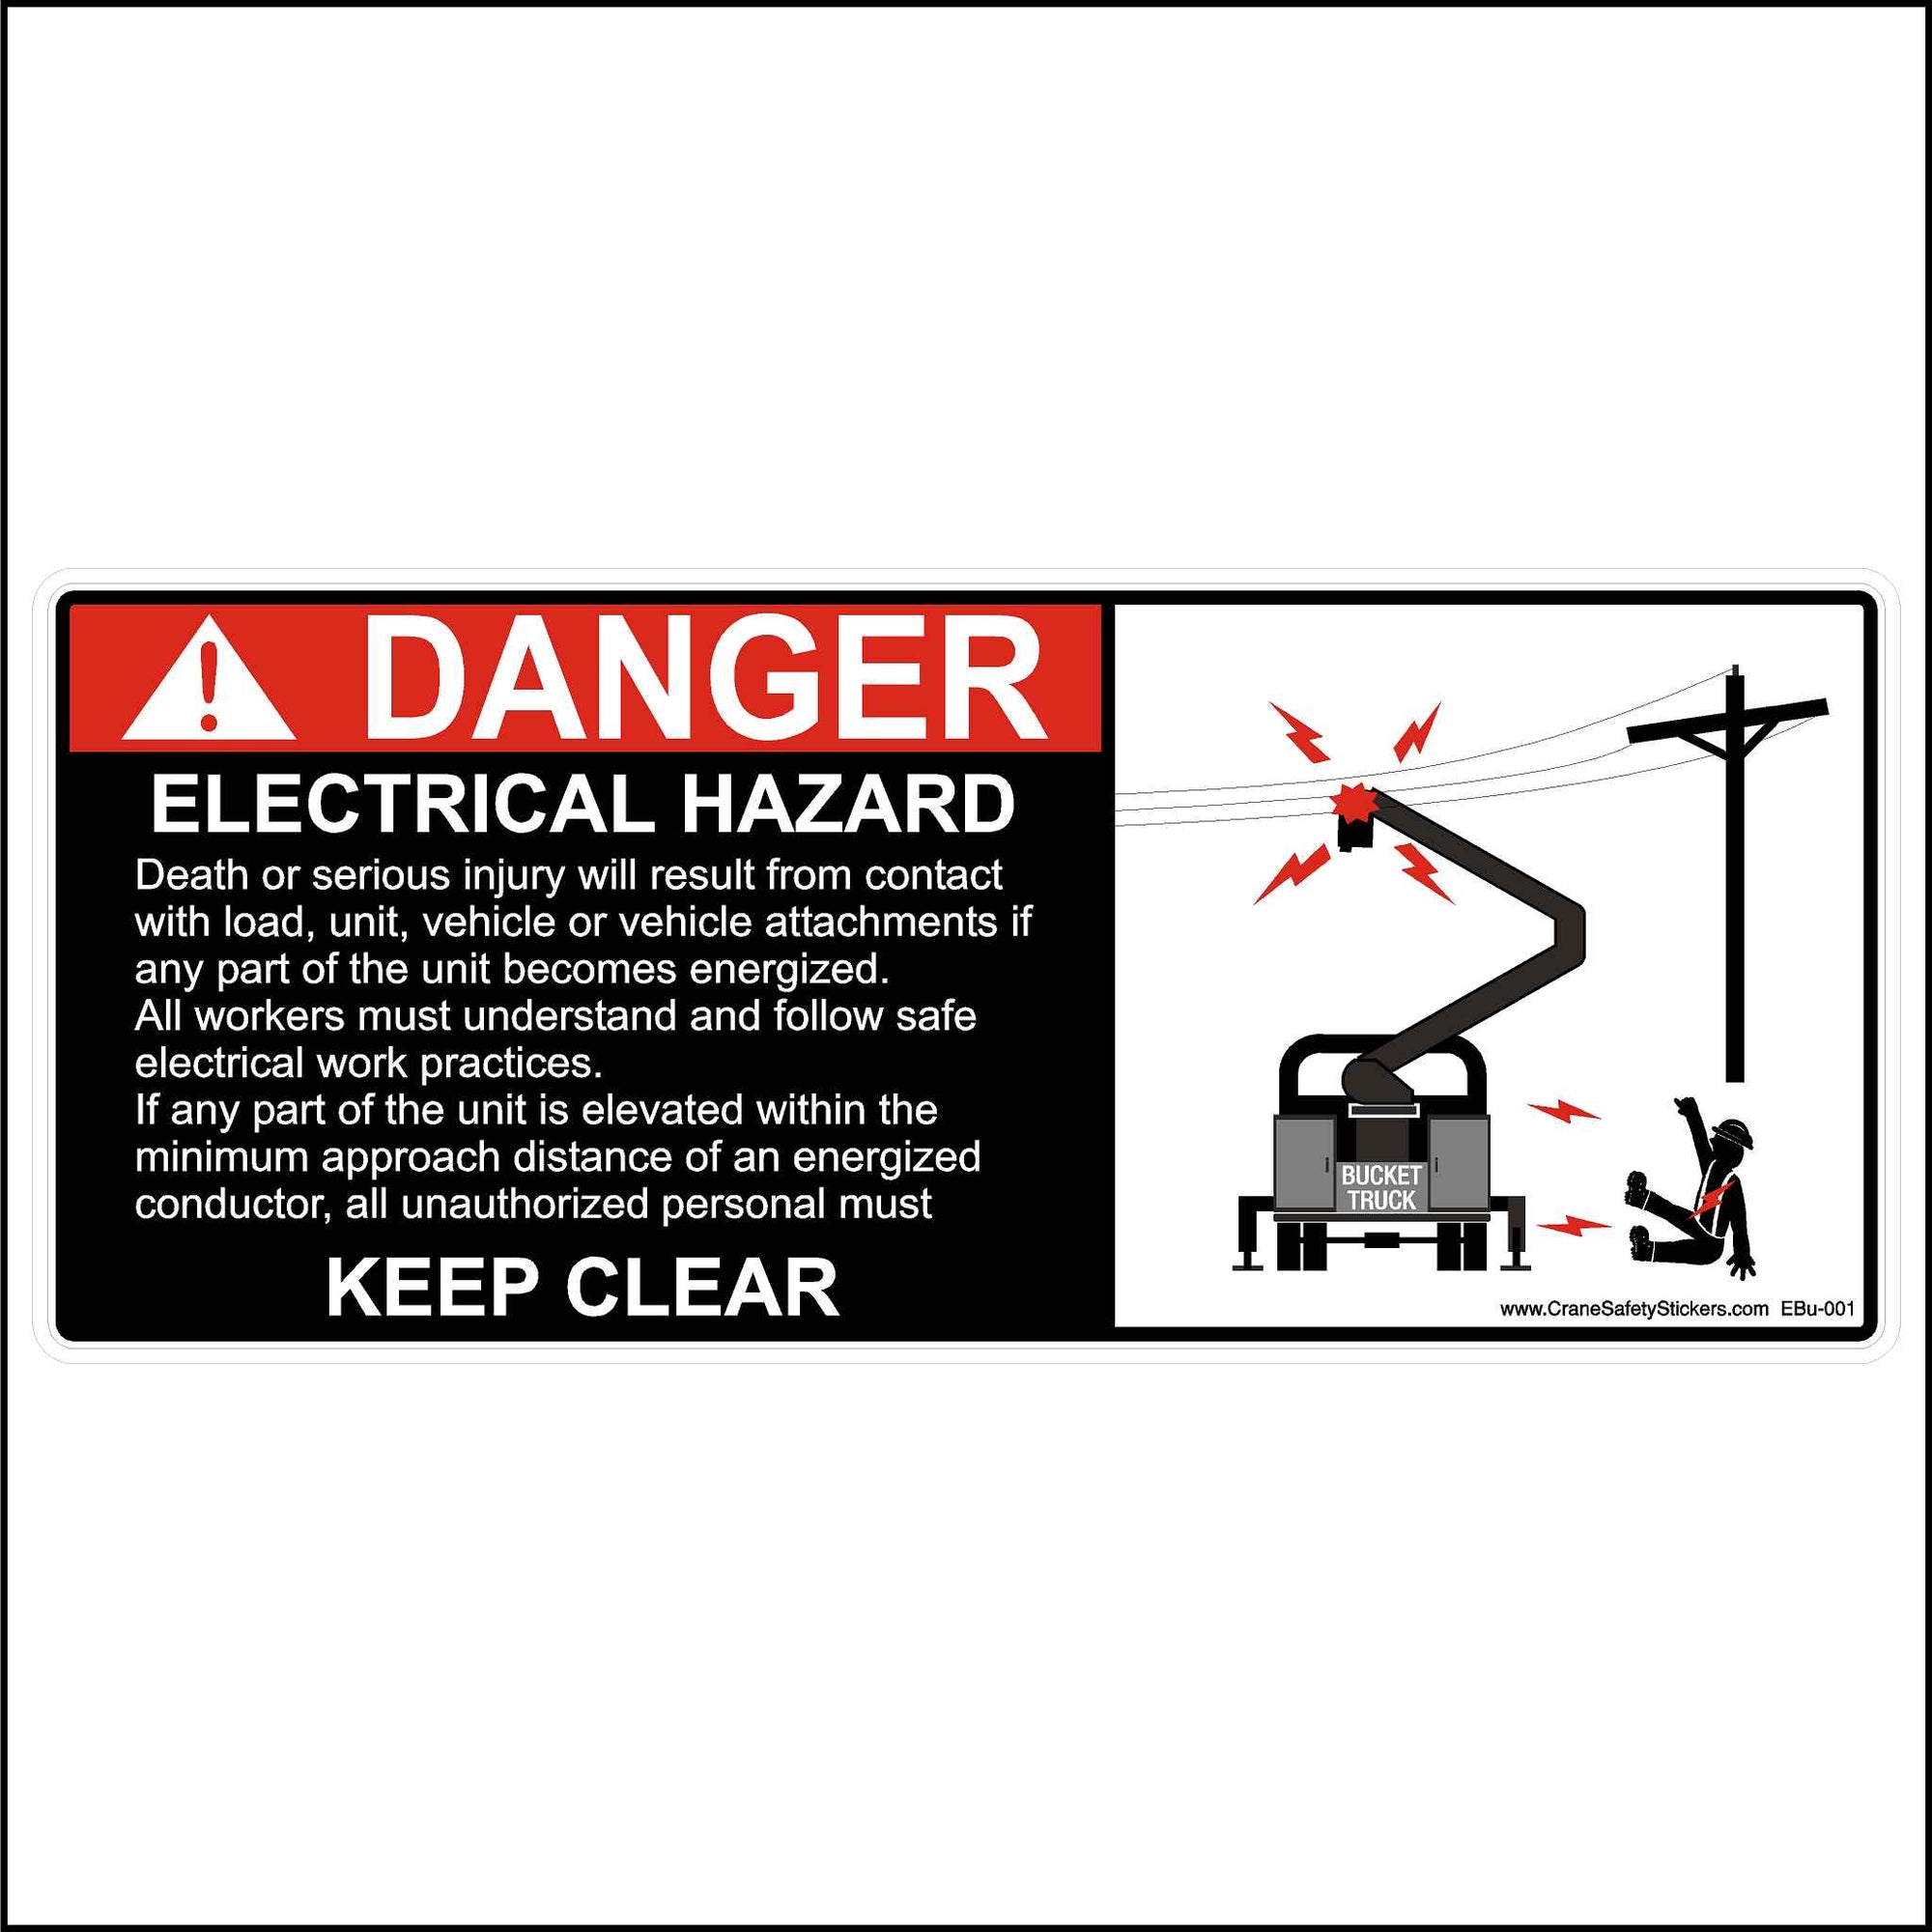 Bucket Truck Electrical Hazard Sticker, Printed With. DANGER, Electrical Hazard Death or serious injury will result from contact with load, unit, vehicle or vehicle attachments if any part of the unit becomes energized. All workers must understand and follow safe electrical work practices. If any part of the unit is elevated within the minimum approach distance of an energized conductor, all unauthorized personal must KEEP CLEAR.